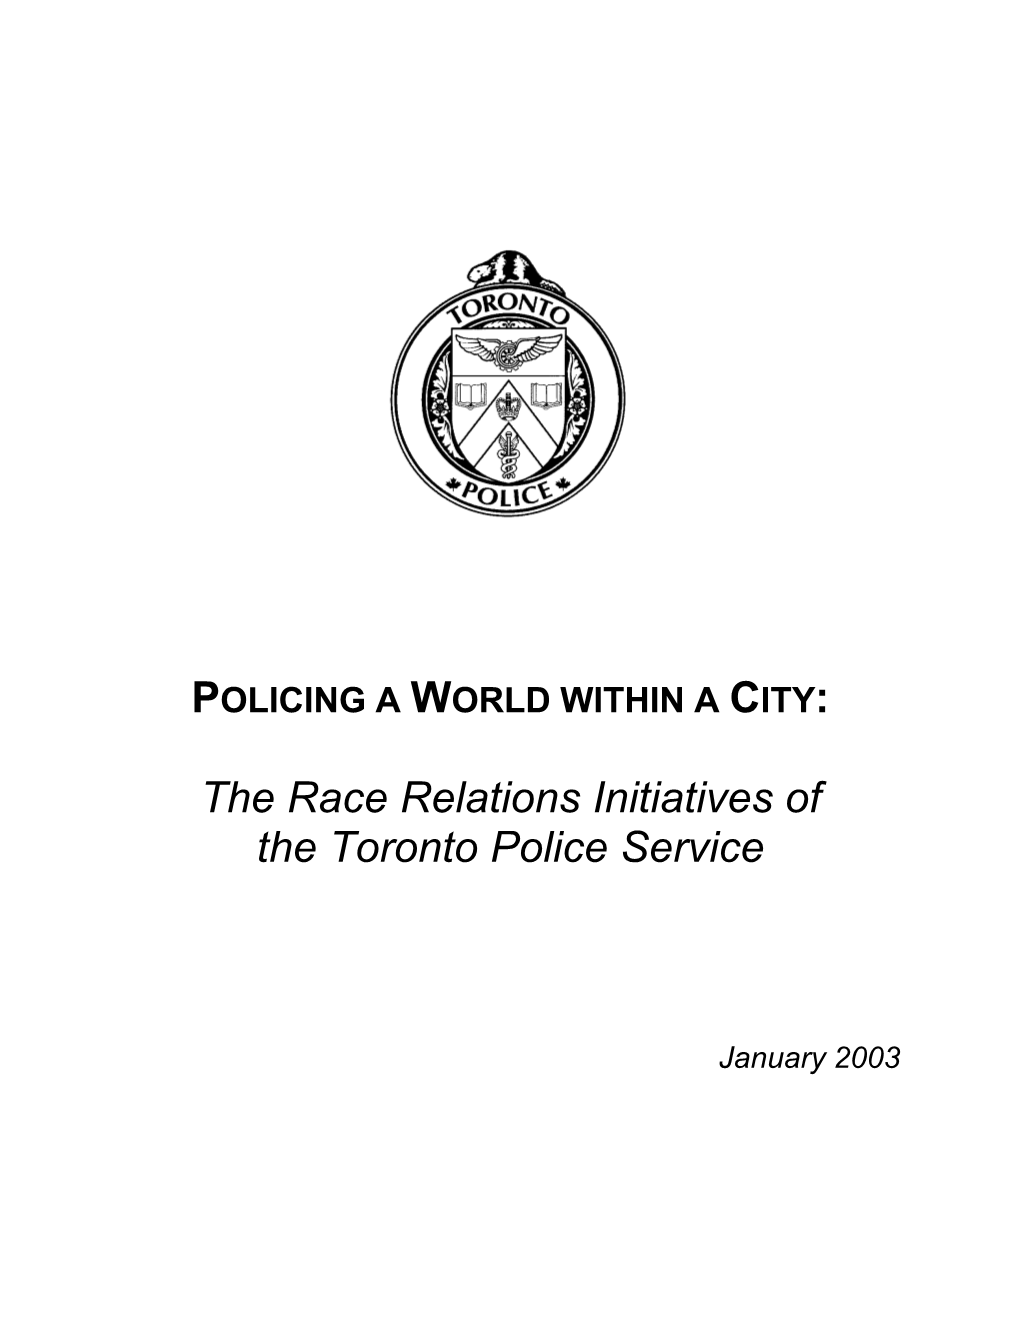 Policing a World Within a City: the Race Relations Initiatives of the Toronto Police Service